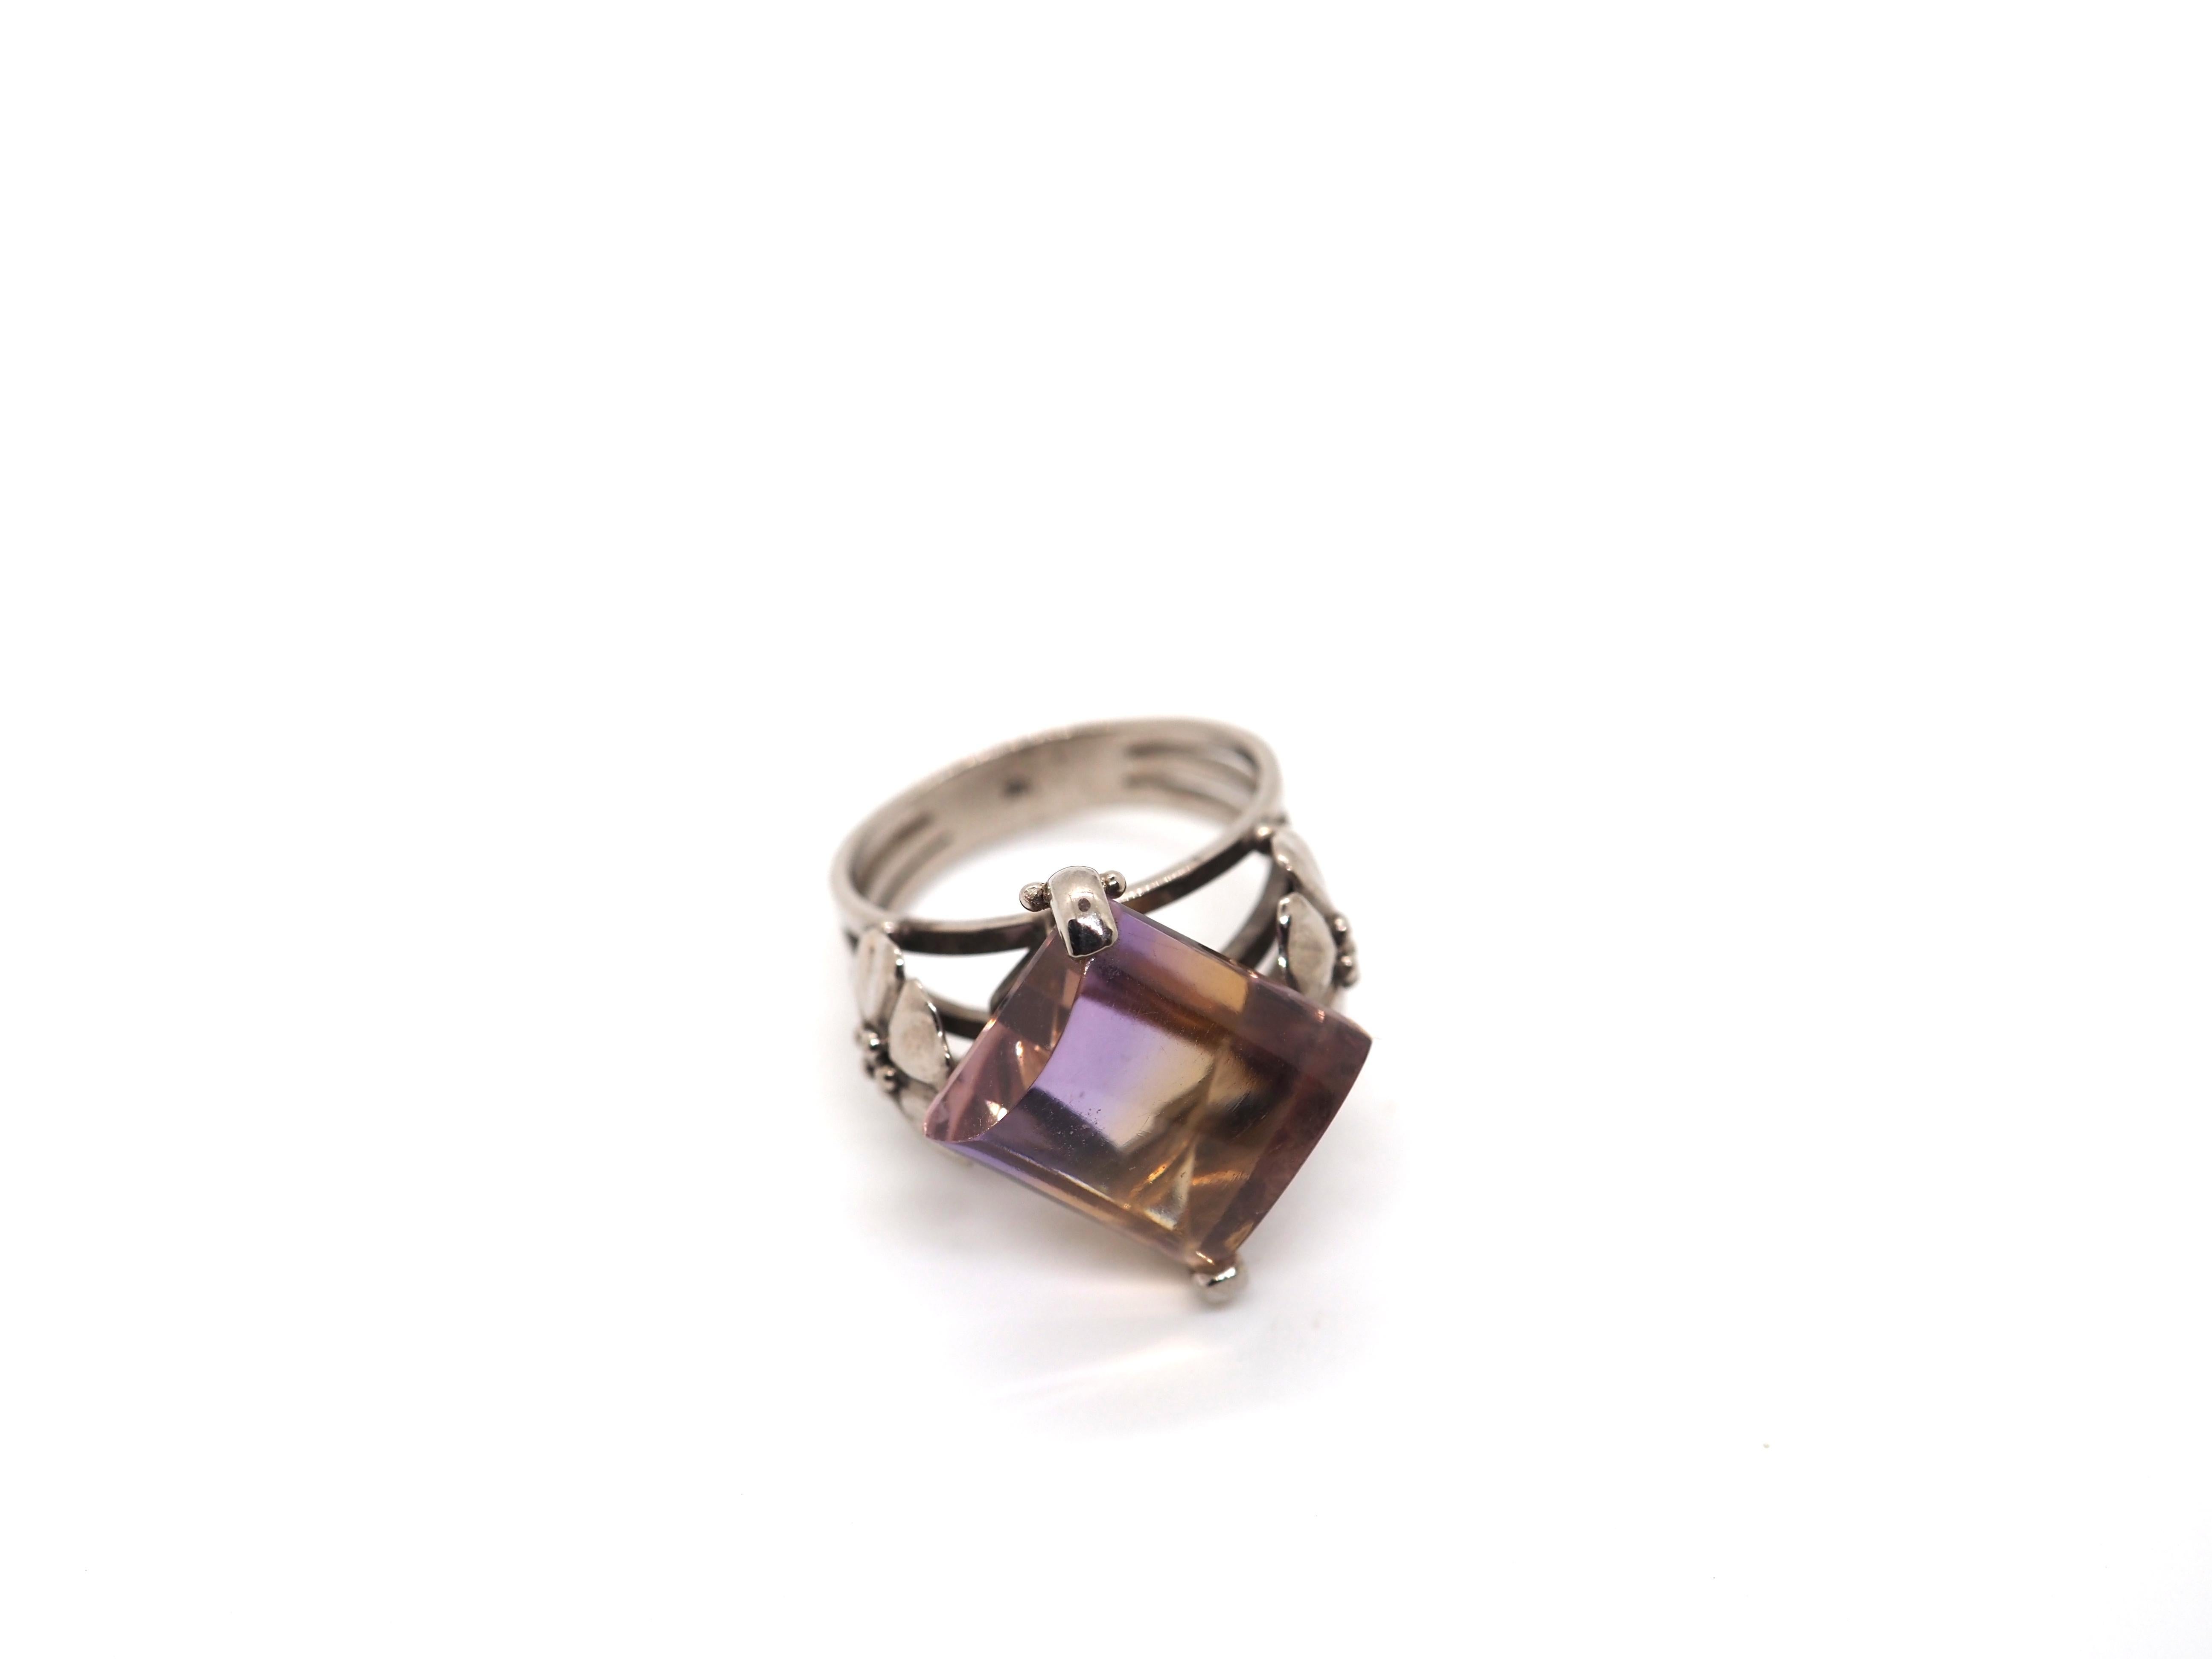 This beautiful ring is crafted in 18 Karat white gold and features an exquisite Ametrine stone. The Ametrine stone is a unique gemstone that features a combination of two colors, purple and yellow. The stone is cut in a faceted shape, which allows